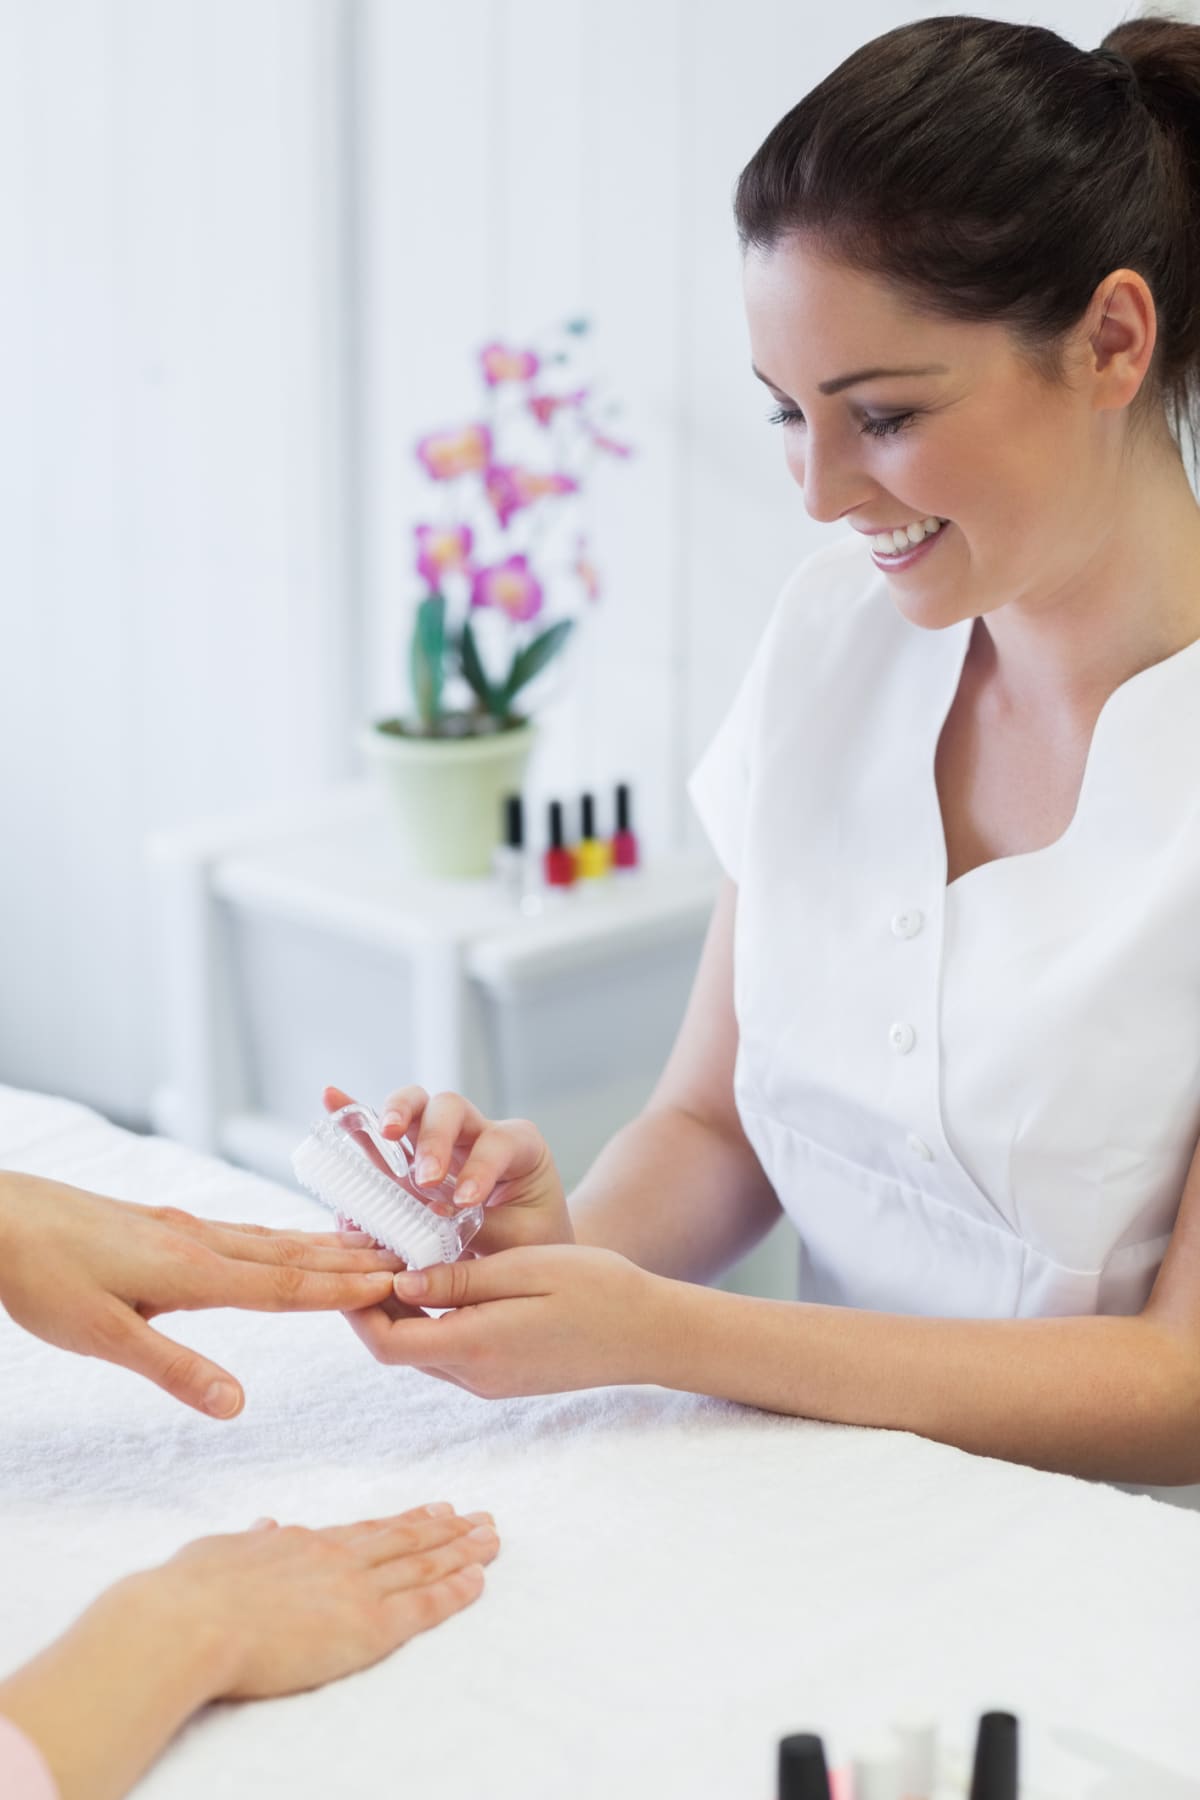 Nail Salon Tips: How Much Should You Give Your Nail Technician?